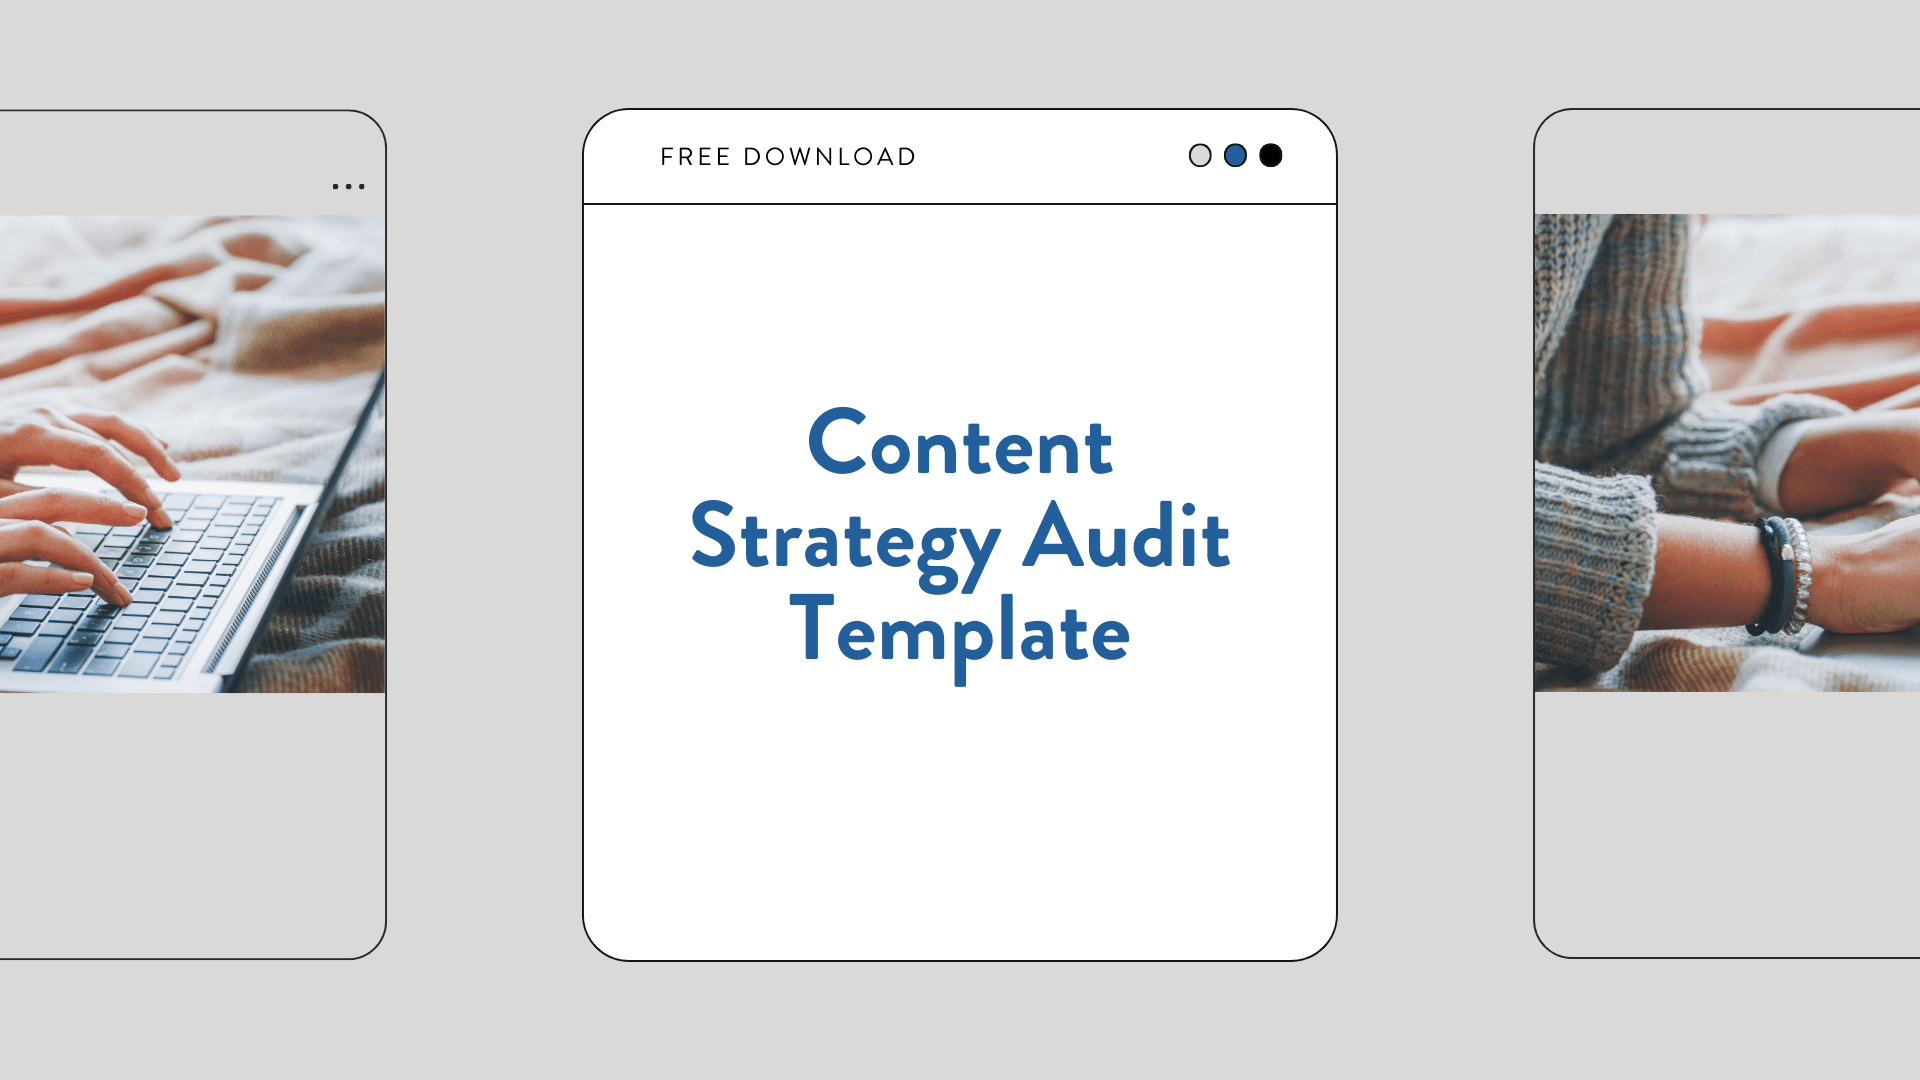 Content Strategy Audit Template